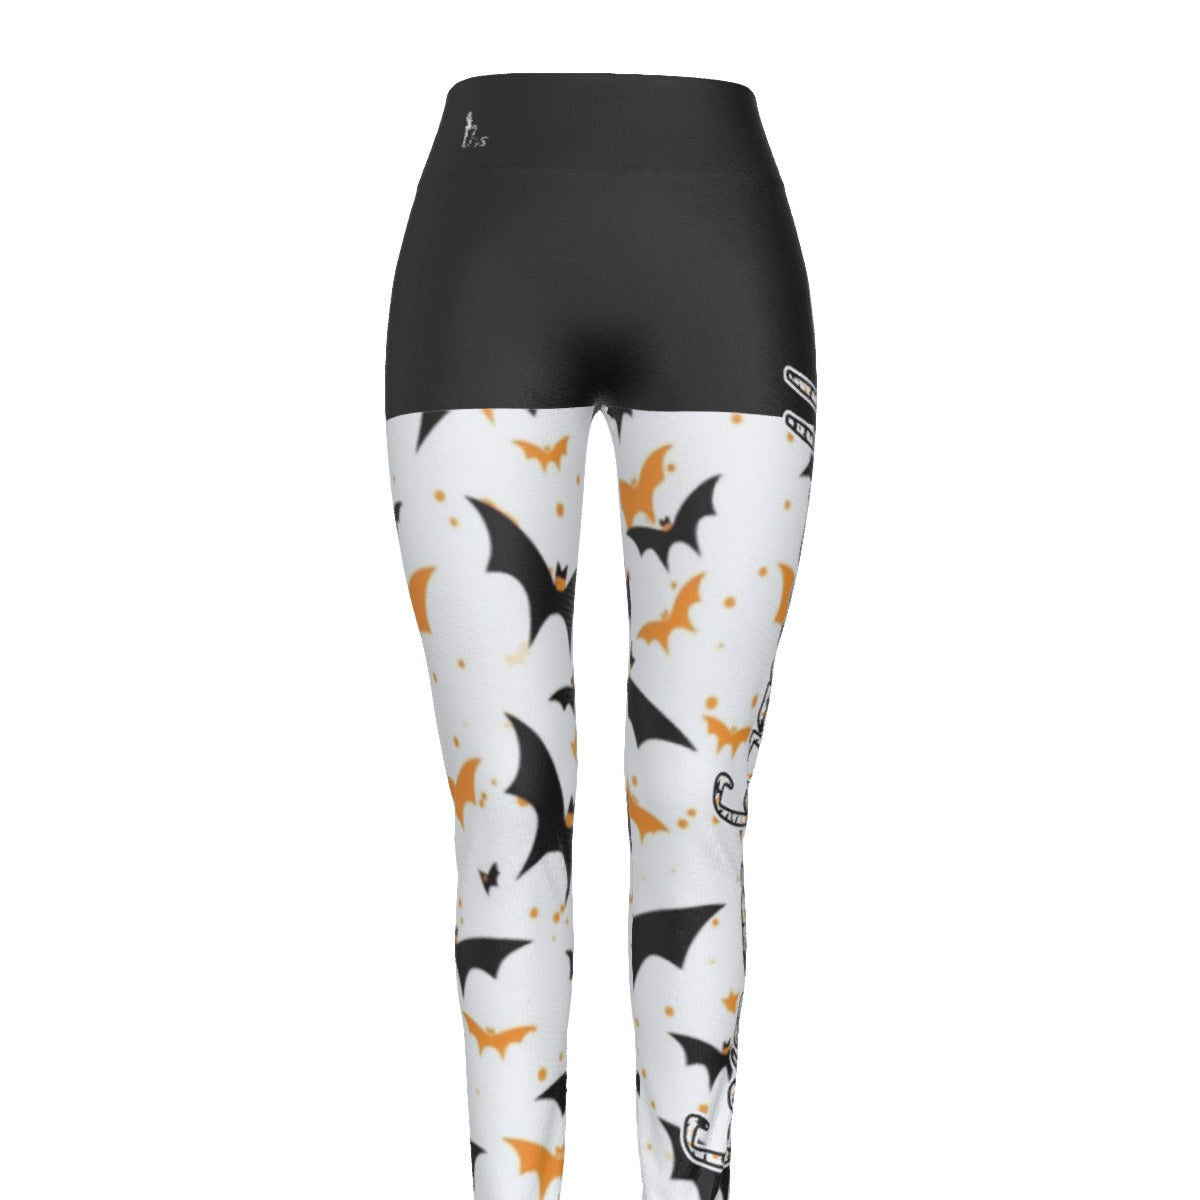 Officially Sexy Halloween Collection Black and Orange Bats Women's Black High Waist Booty Popper Leggings #2 (English) 1